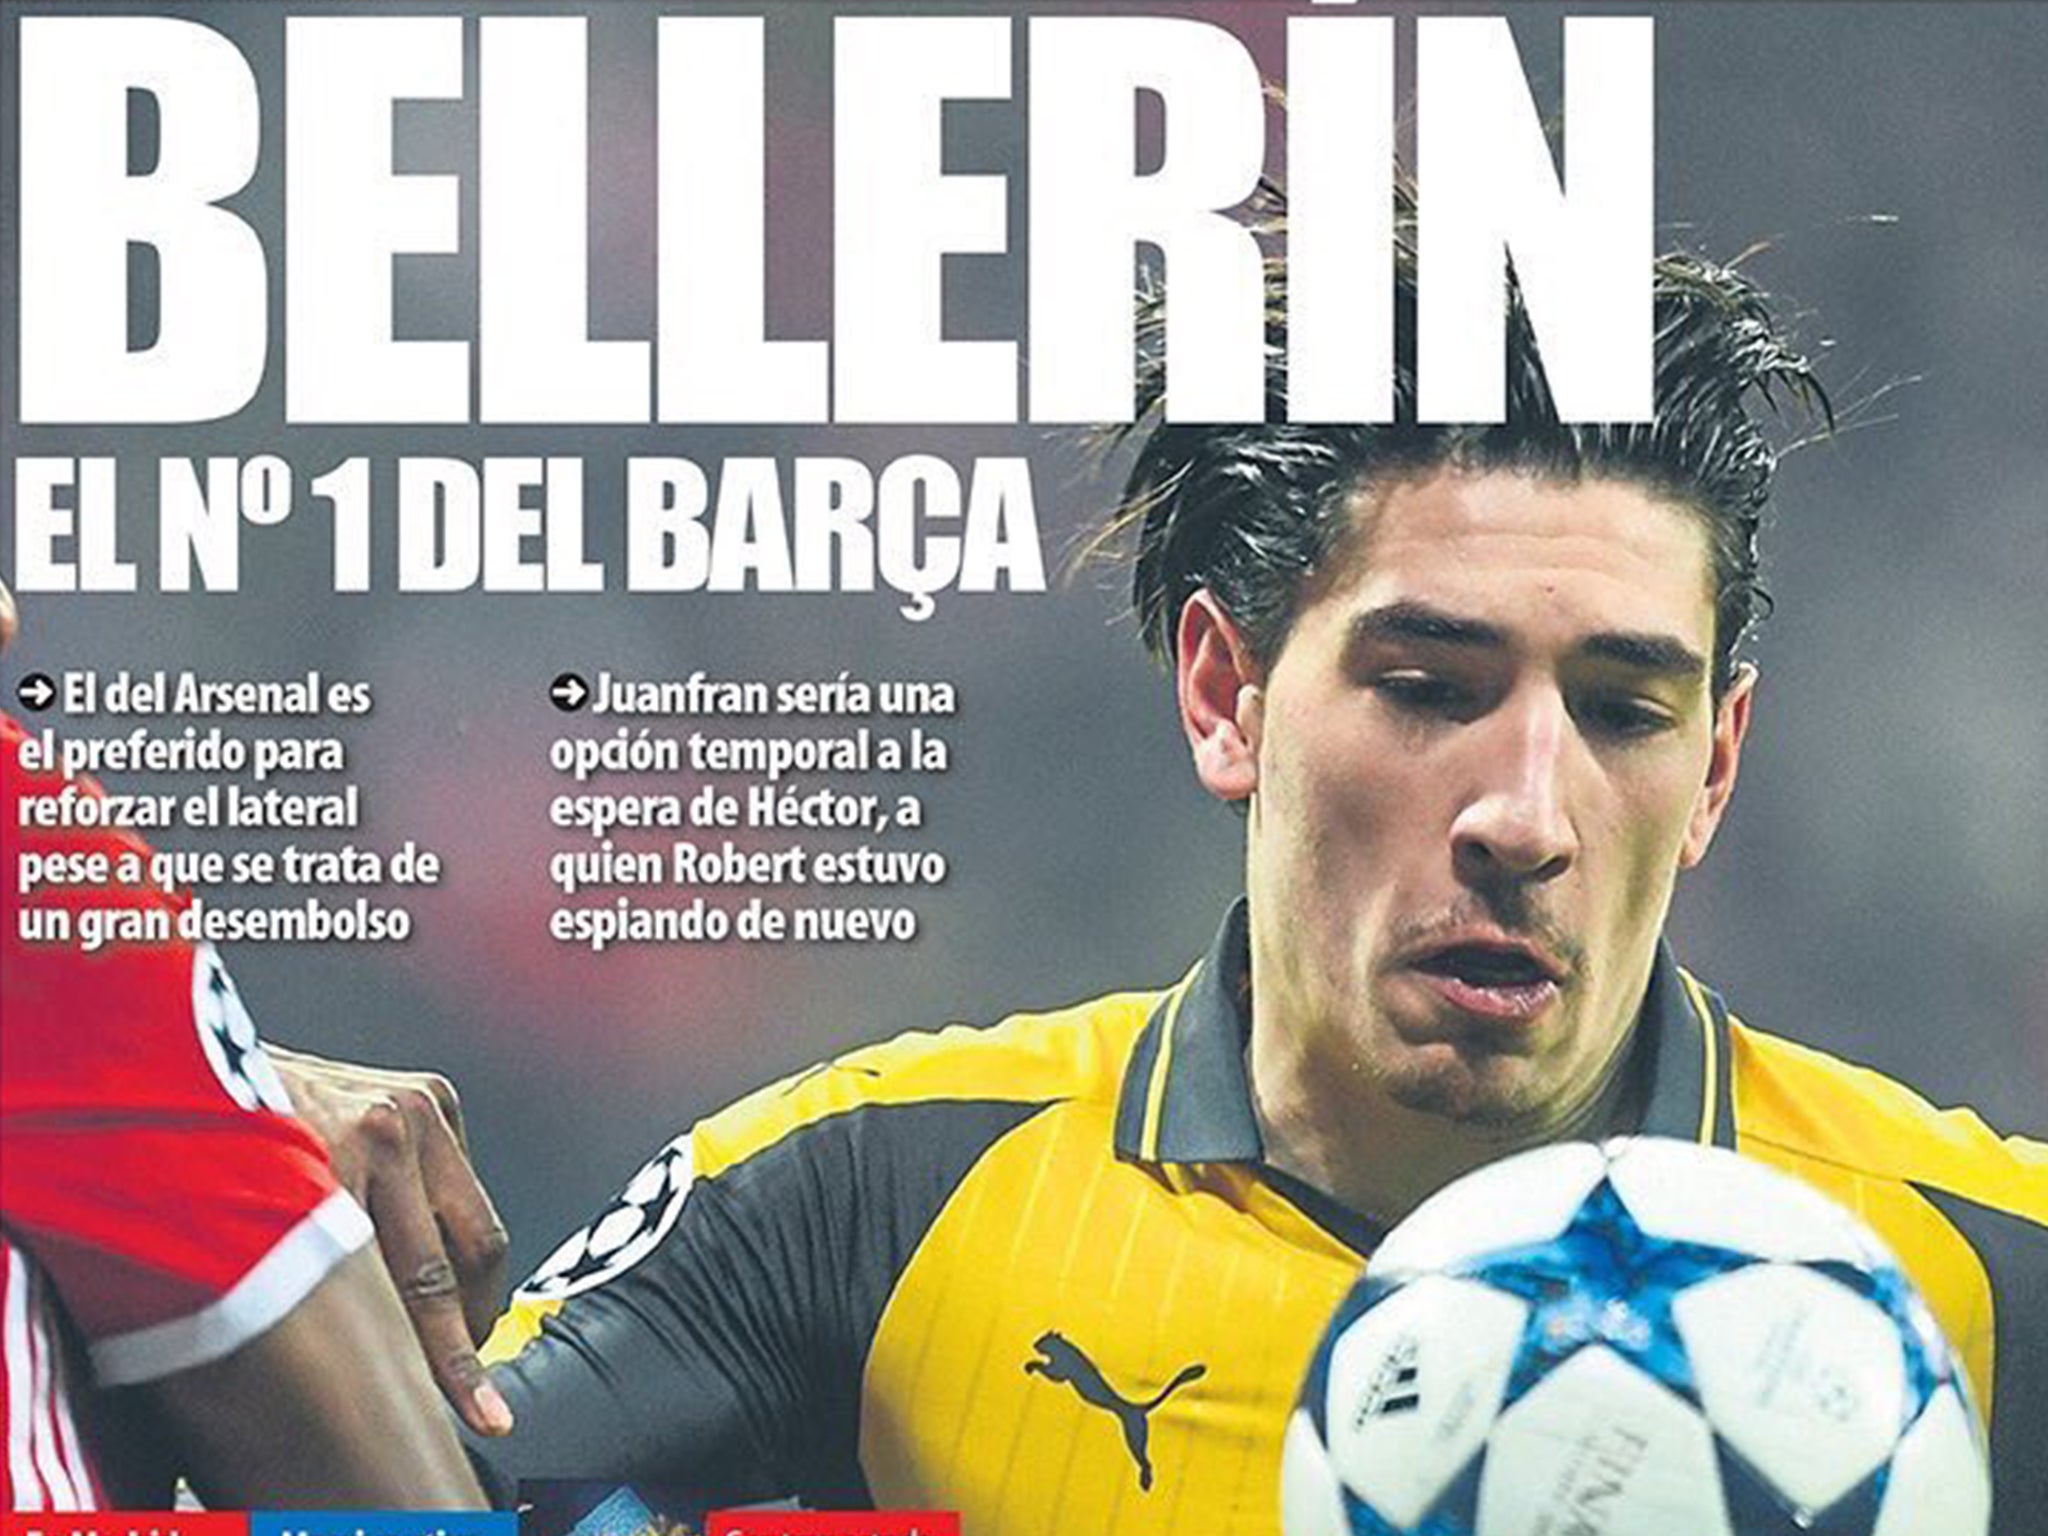 Bellerin featured on the front page of Mundo Deportivo